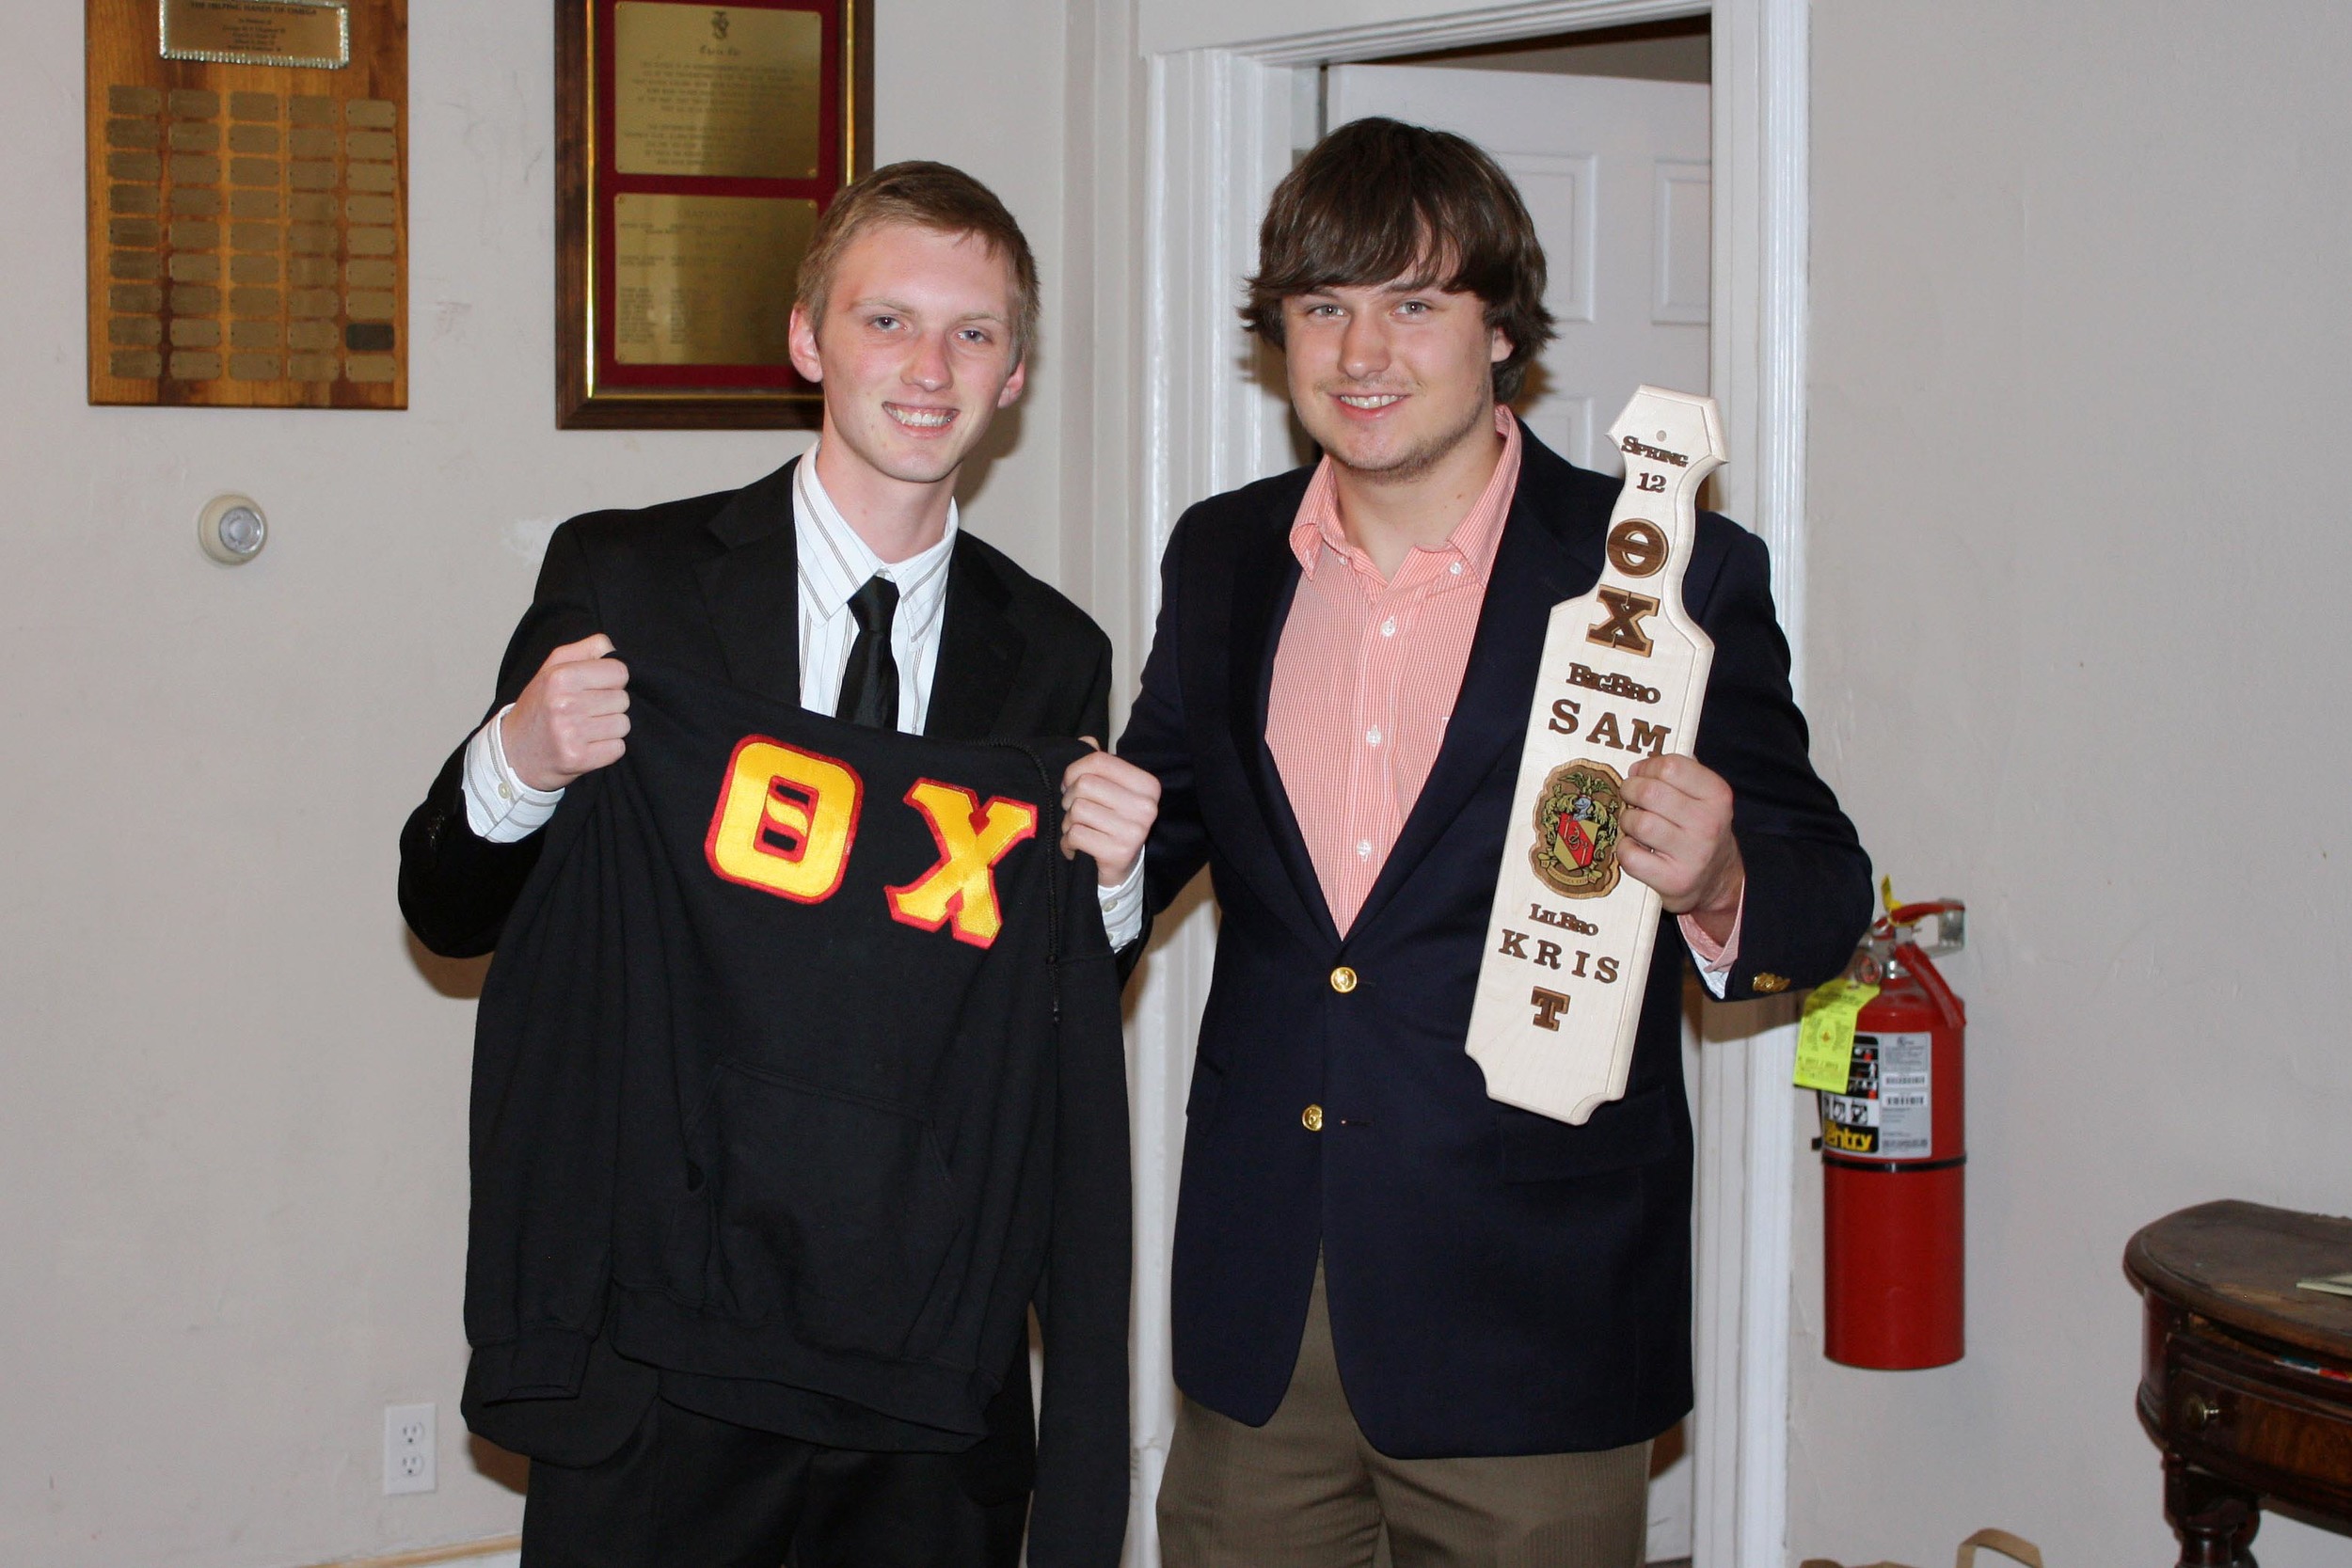  Little Brother Kris Canner (L) and Big Brother Sam Shively
Spring 2012 Initiation Night 